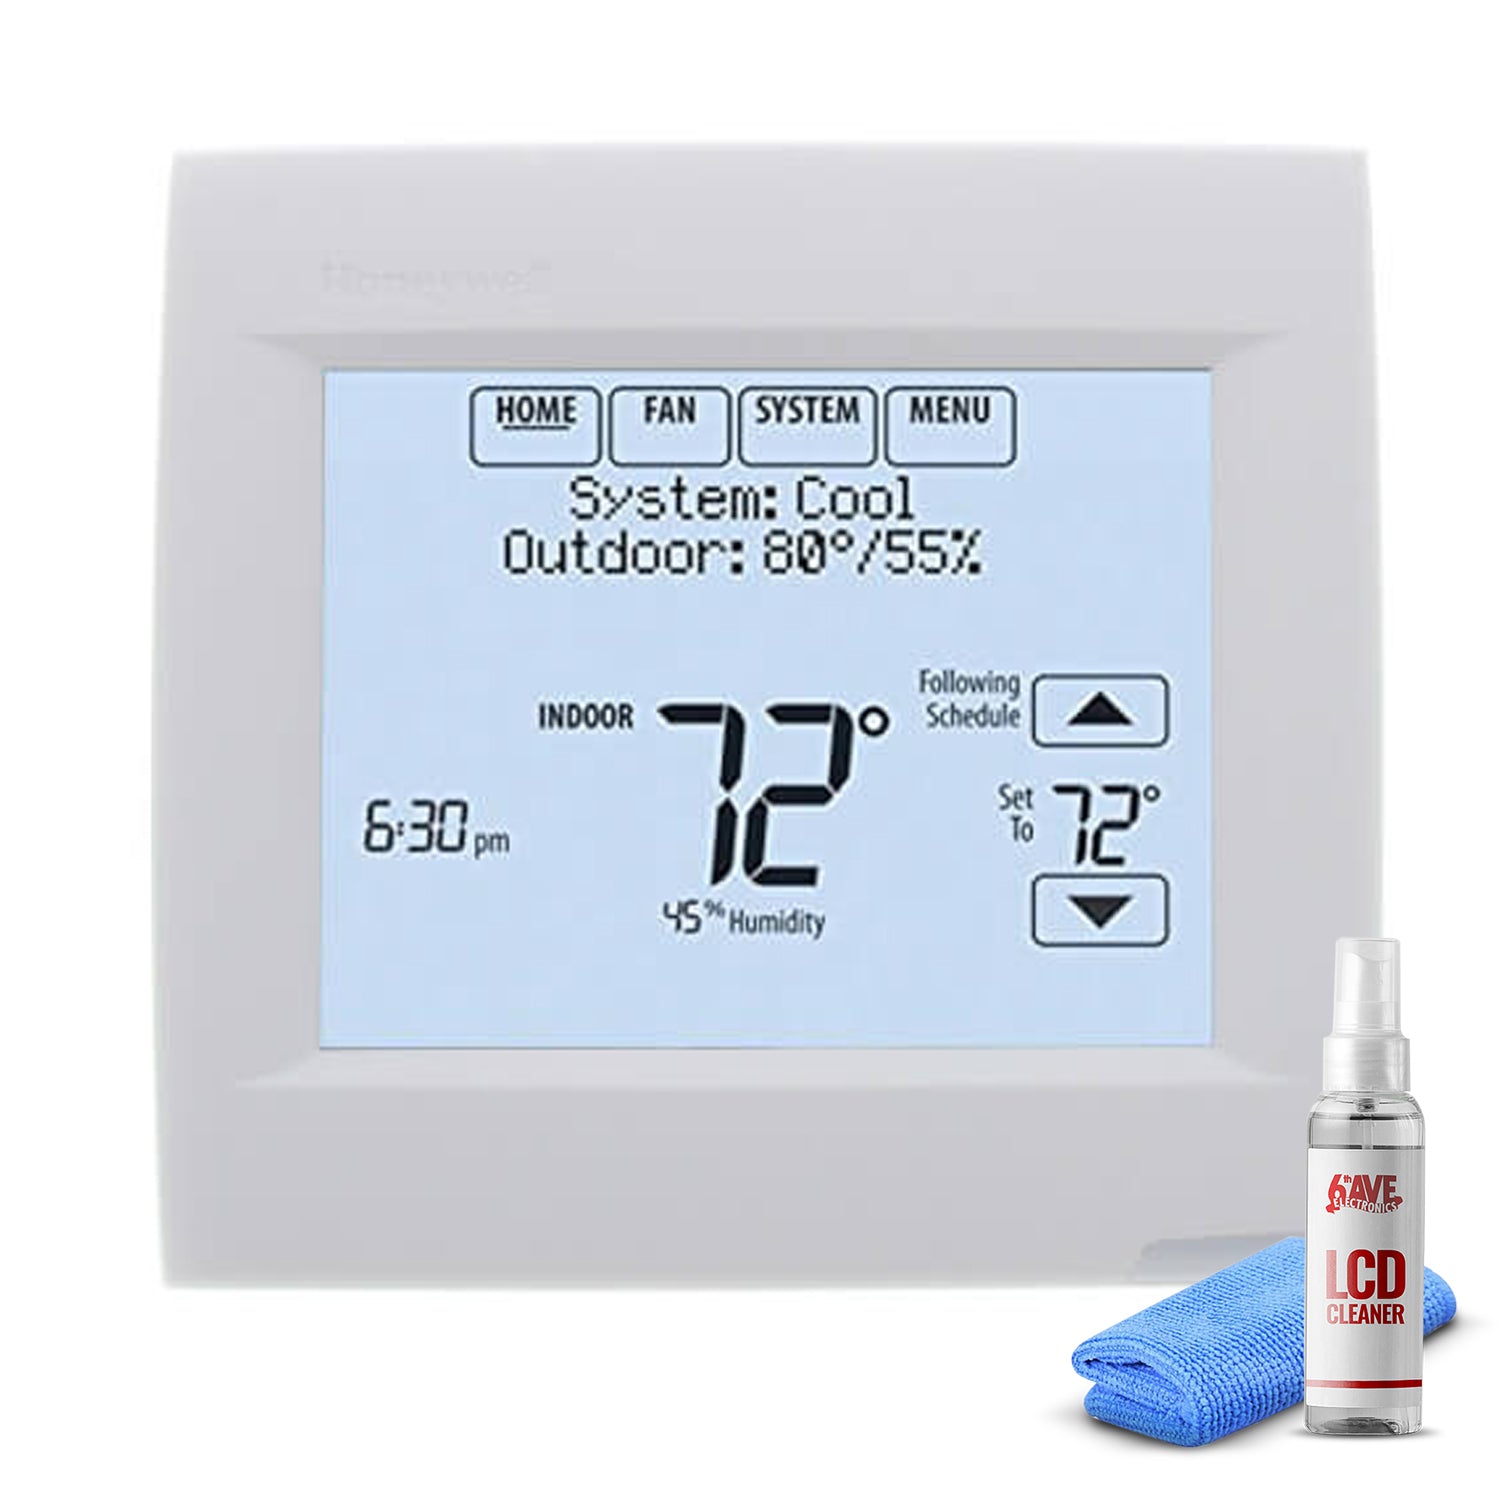 Honeywell VisionPRO 8000 Thermostat - White + LCD Cleaner